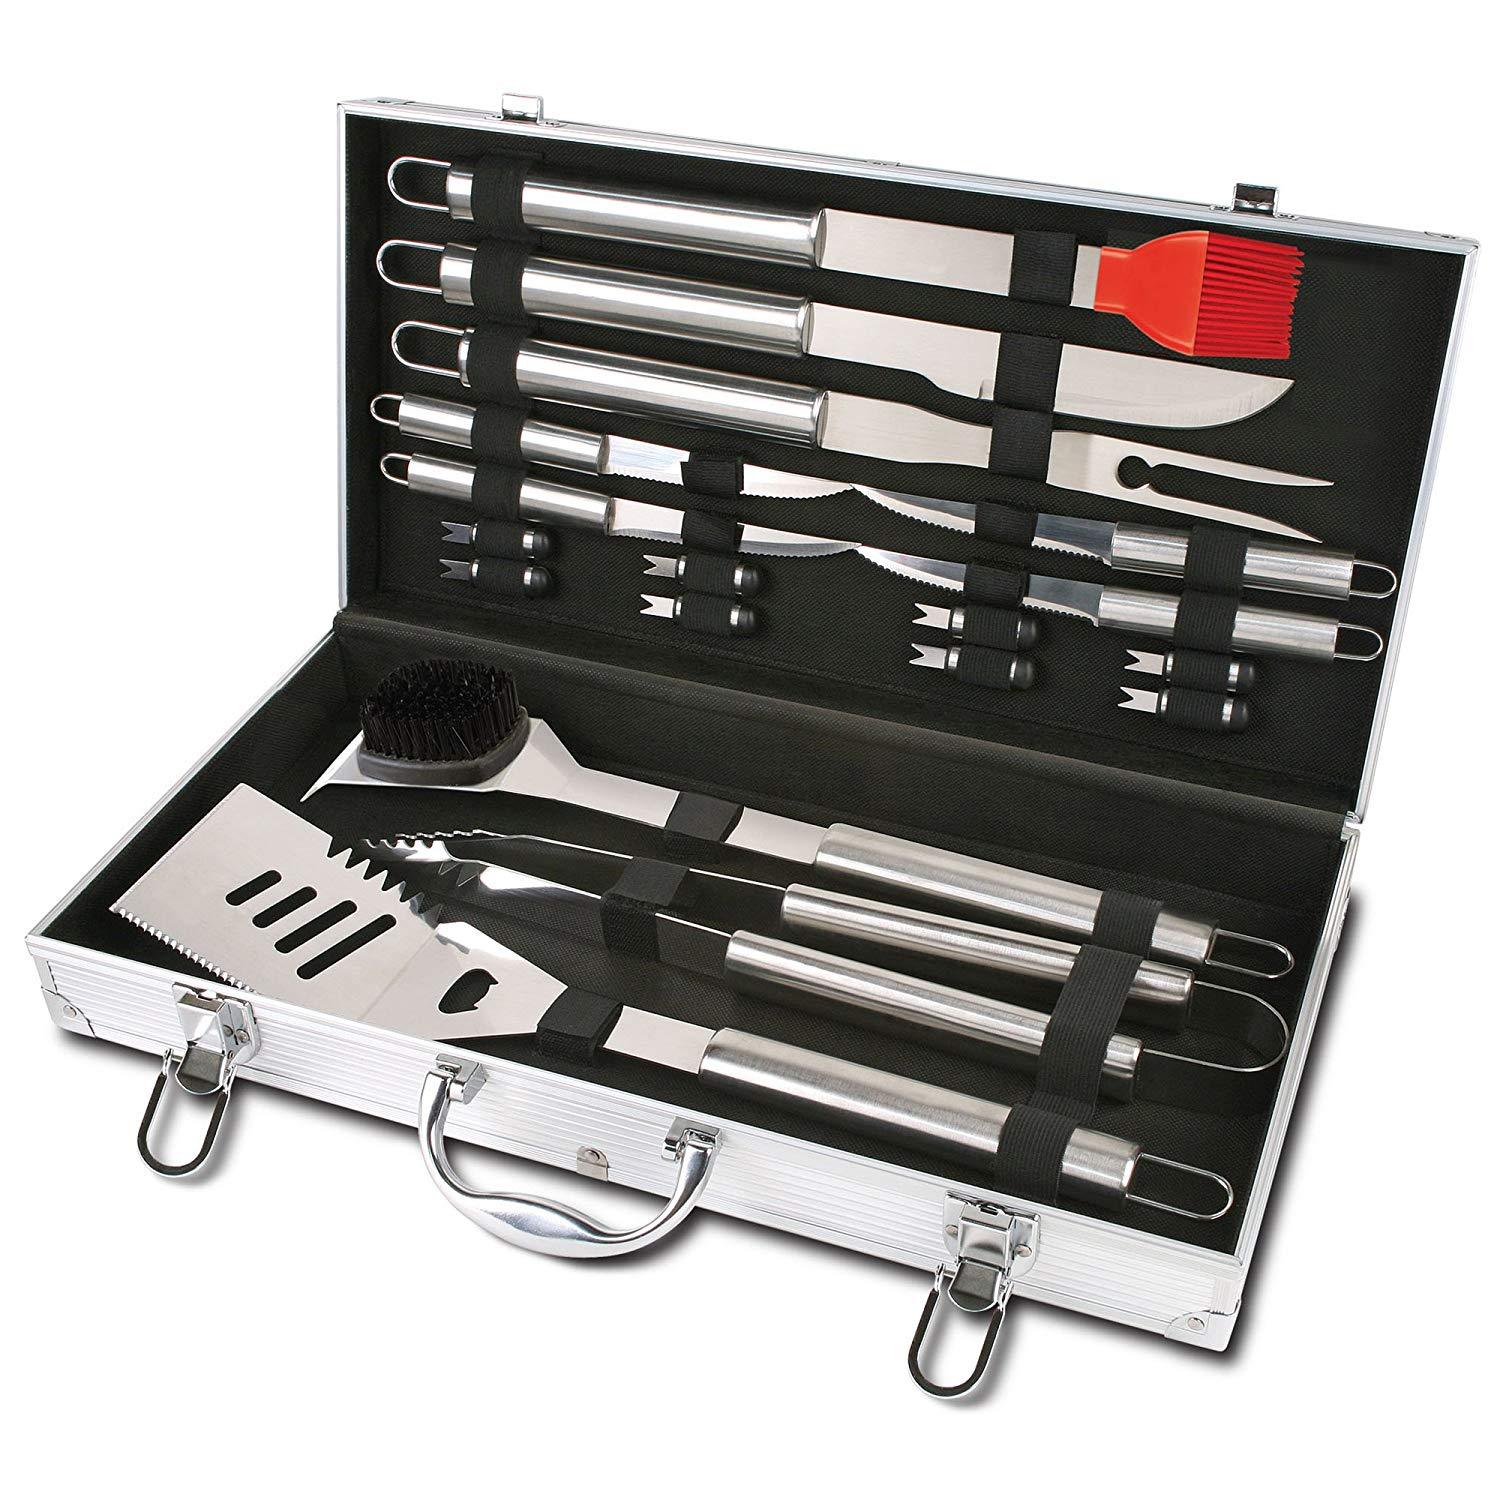 Chefs Basics HW5231 18-Piece Stainless-Steel Barbecue Set with Carrying Case